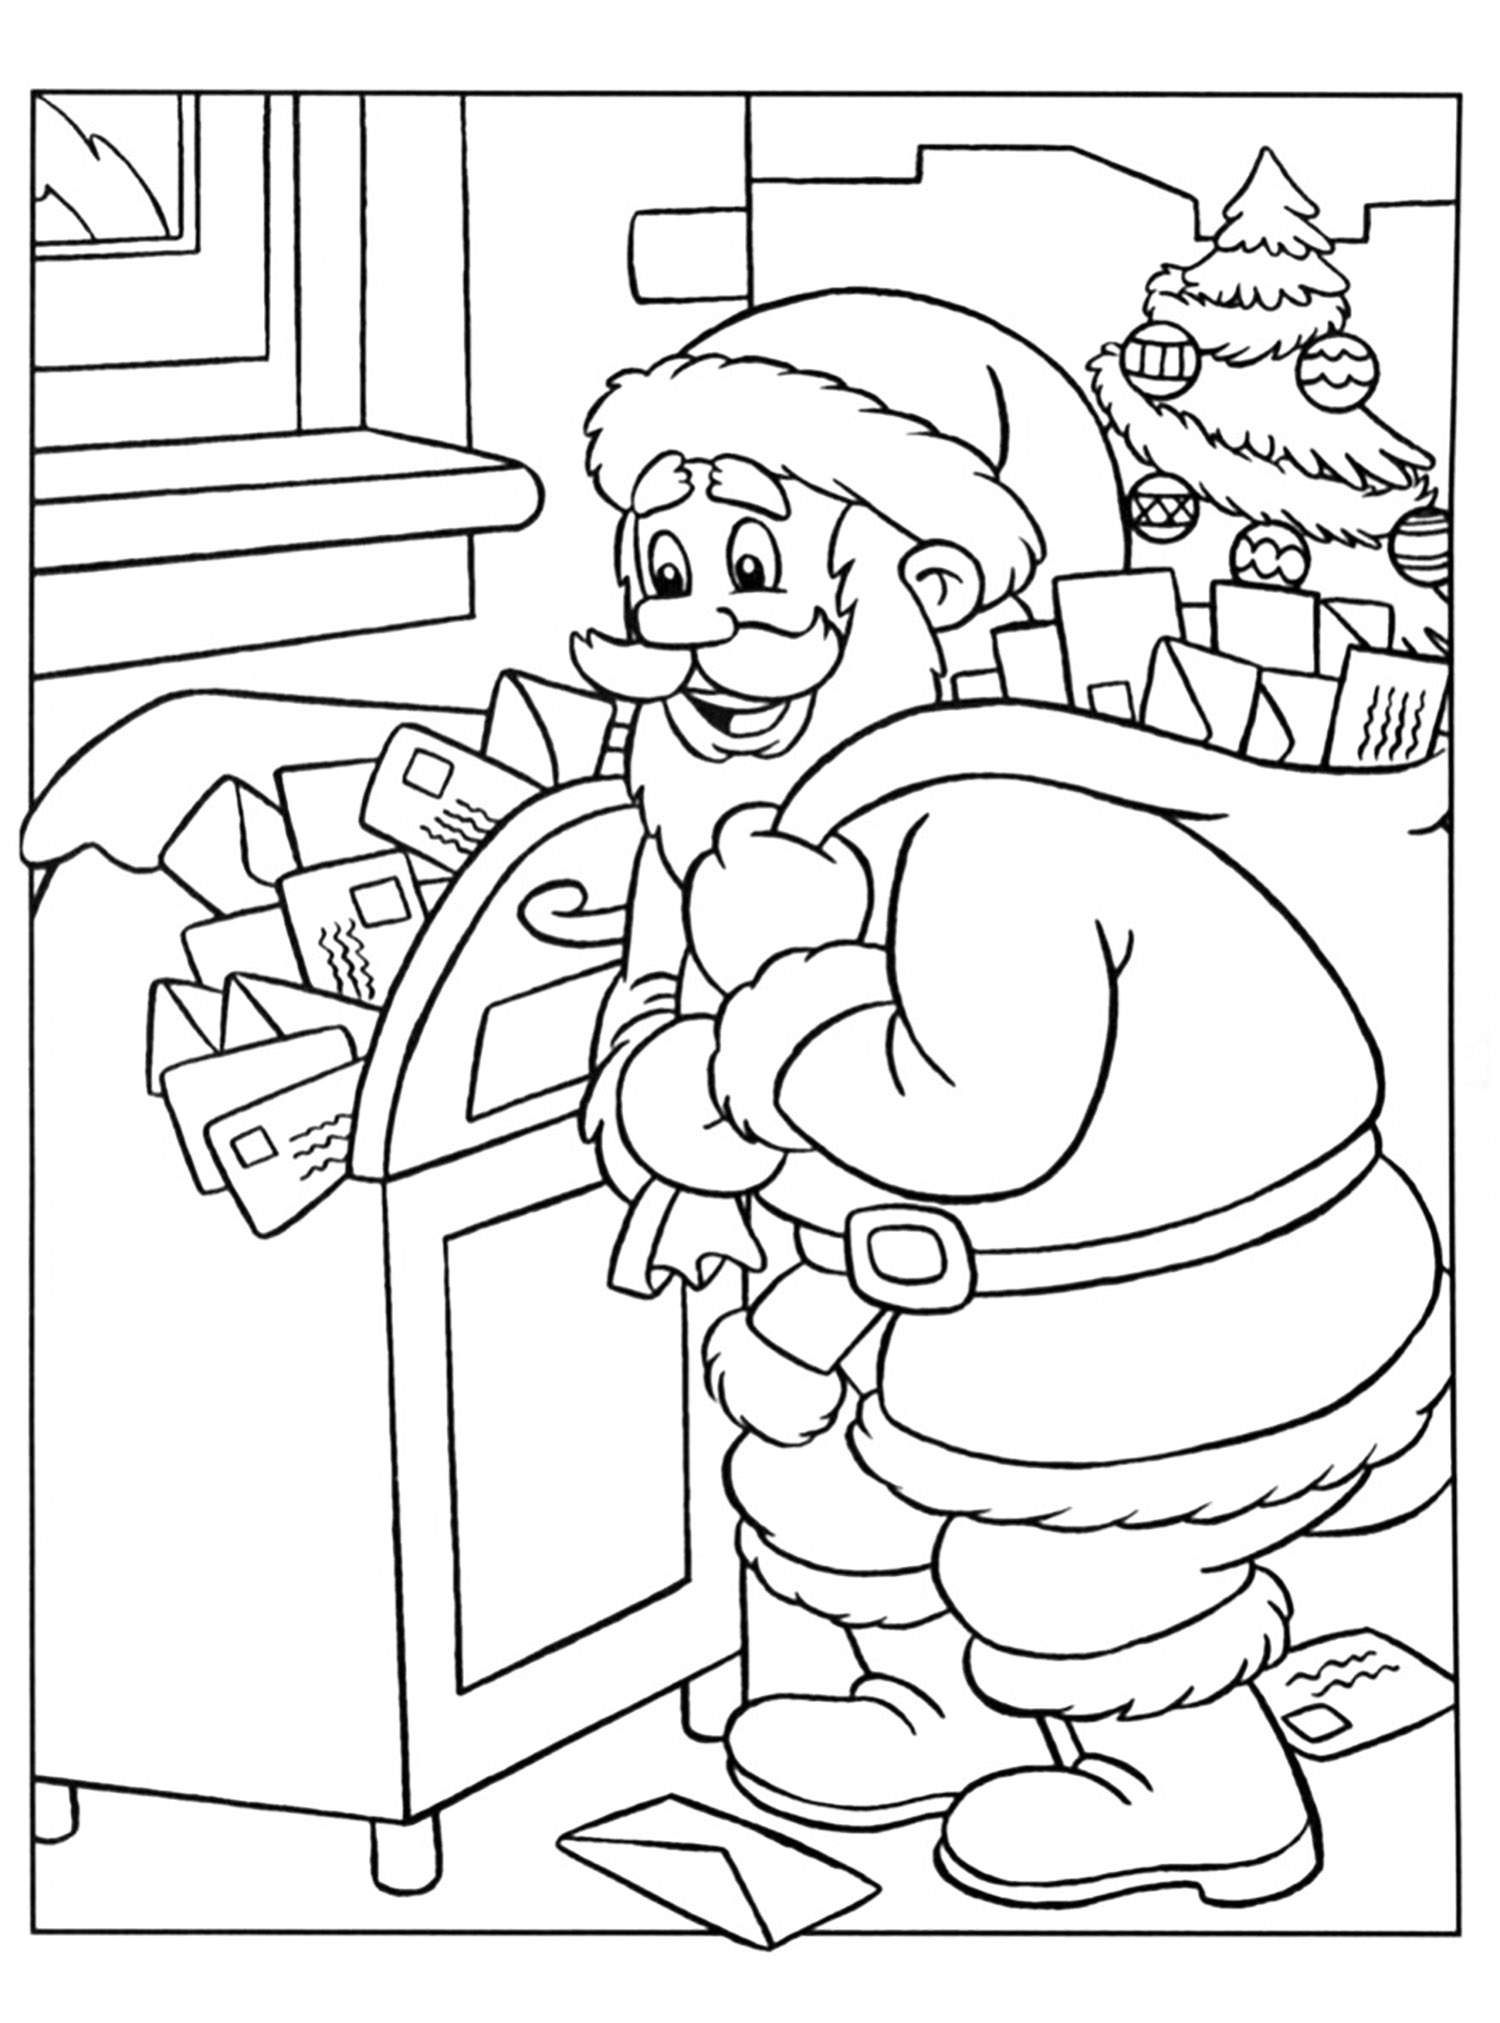 Santa claus and his letters - Christmas Coloring pages for ...